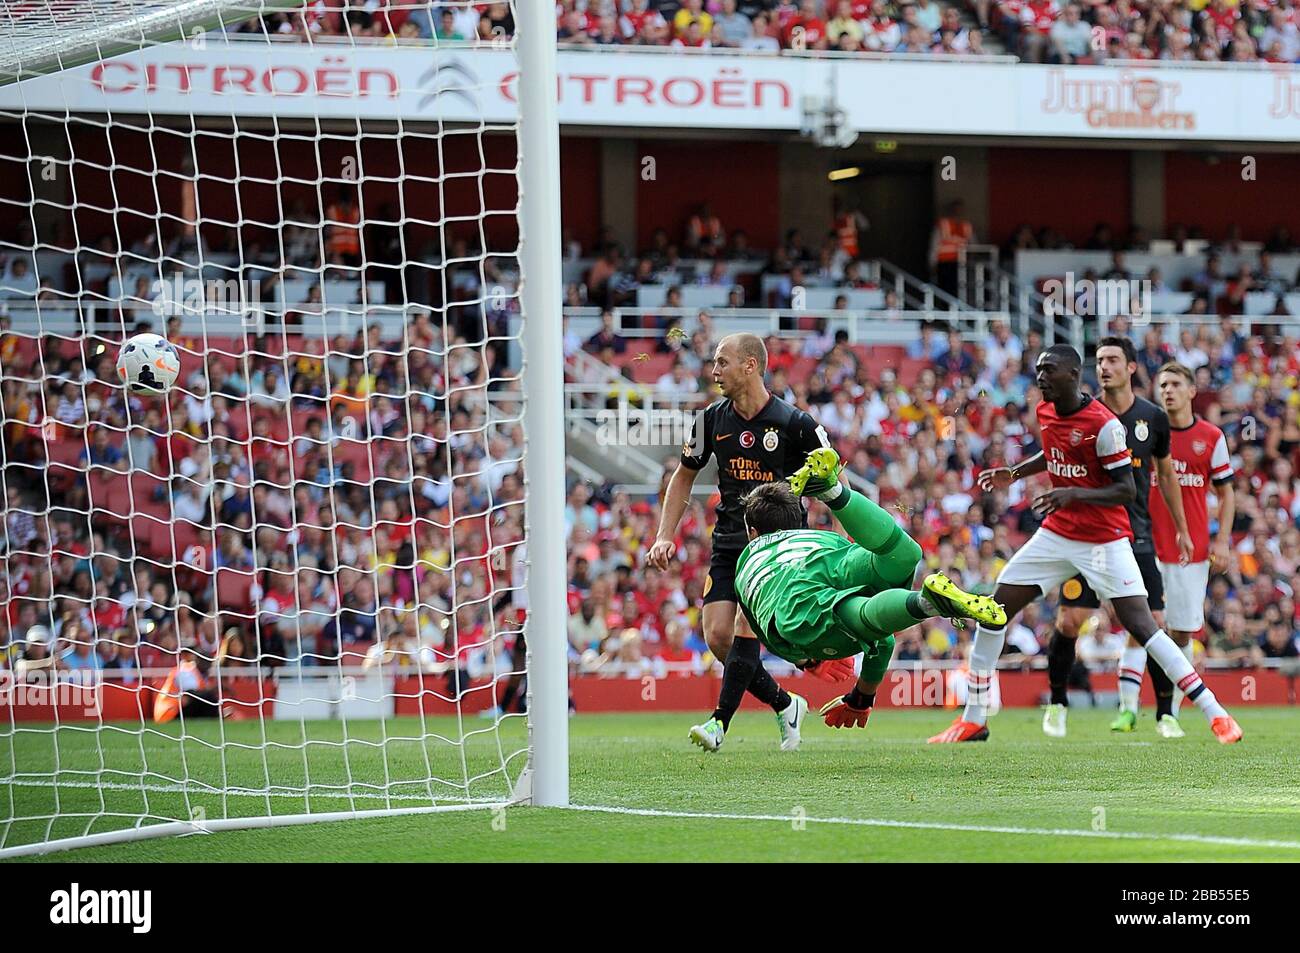 Galatasaray goalkeeper Fernando Muslera fails to stop a shot from Arsenal's Theo Walcott (not in picture) for their first goal of the game Stock Photo